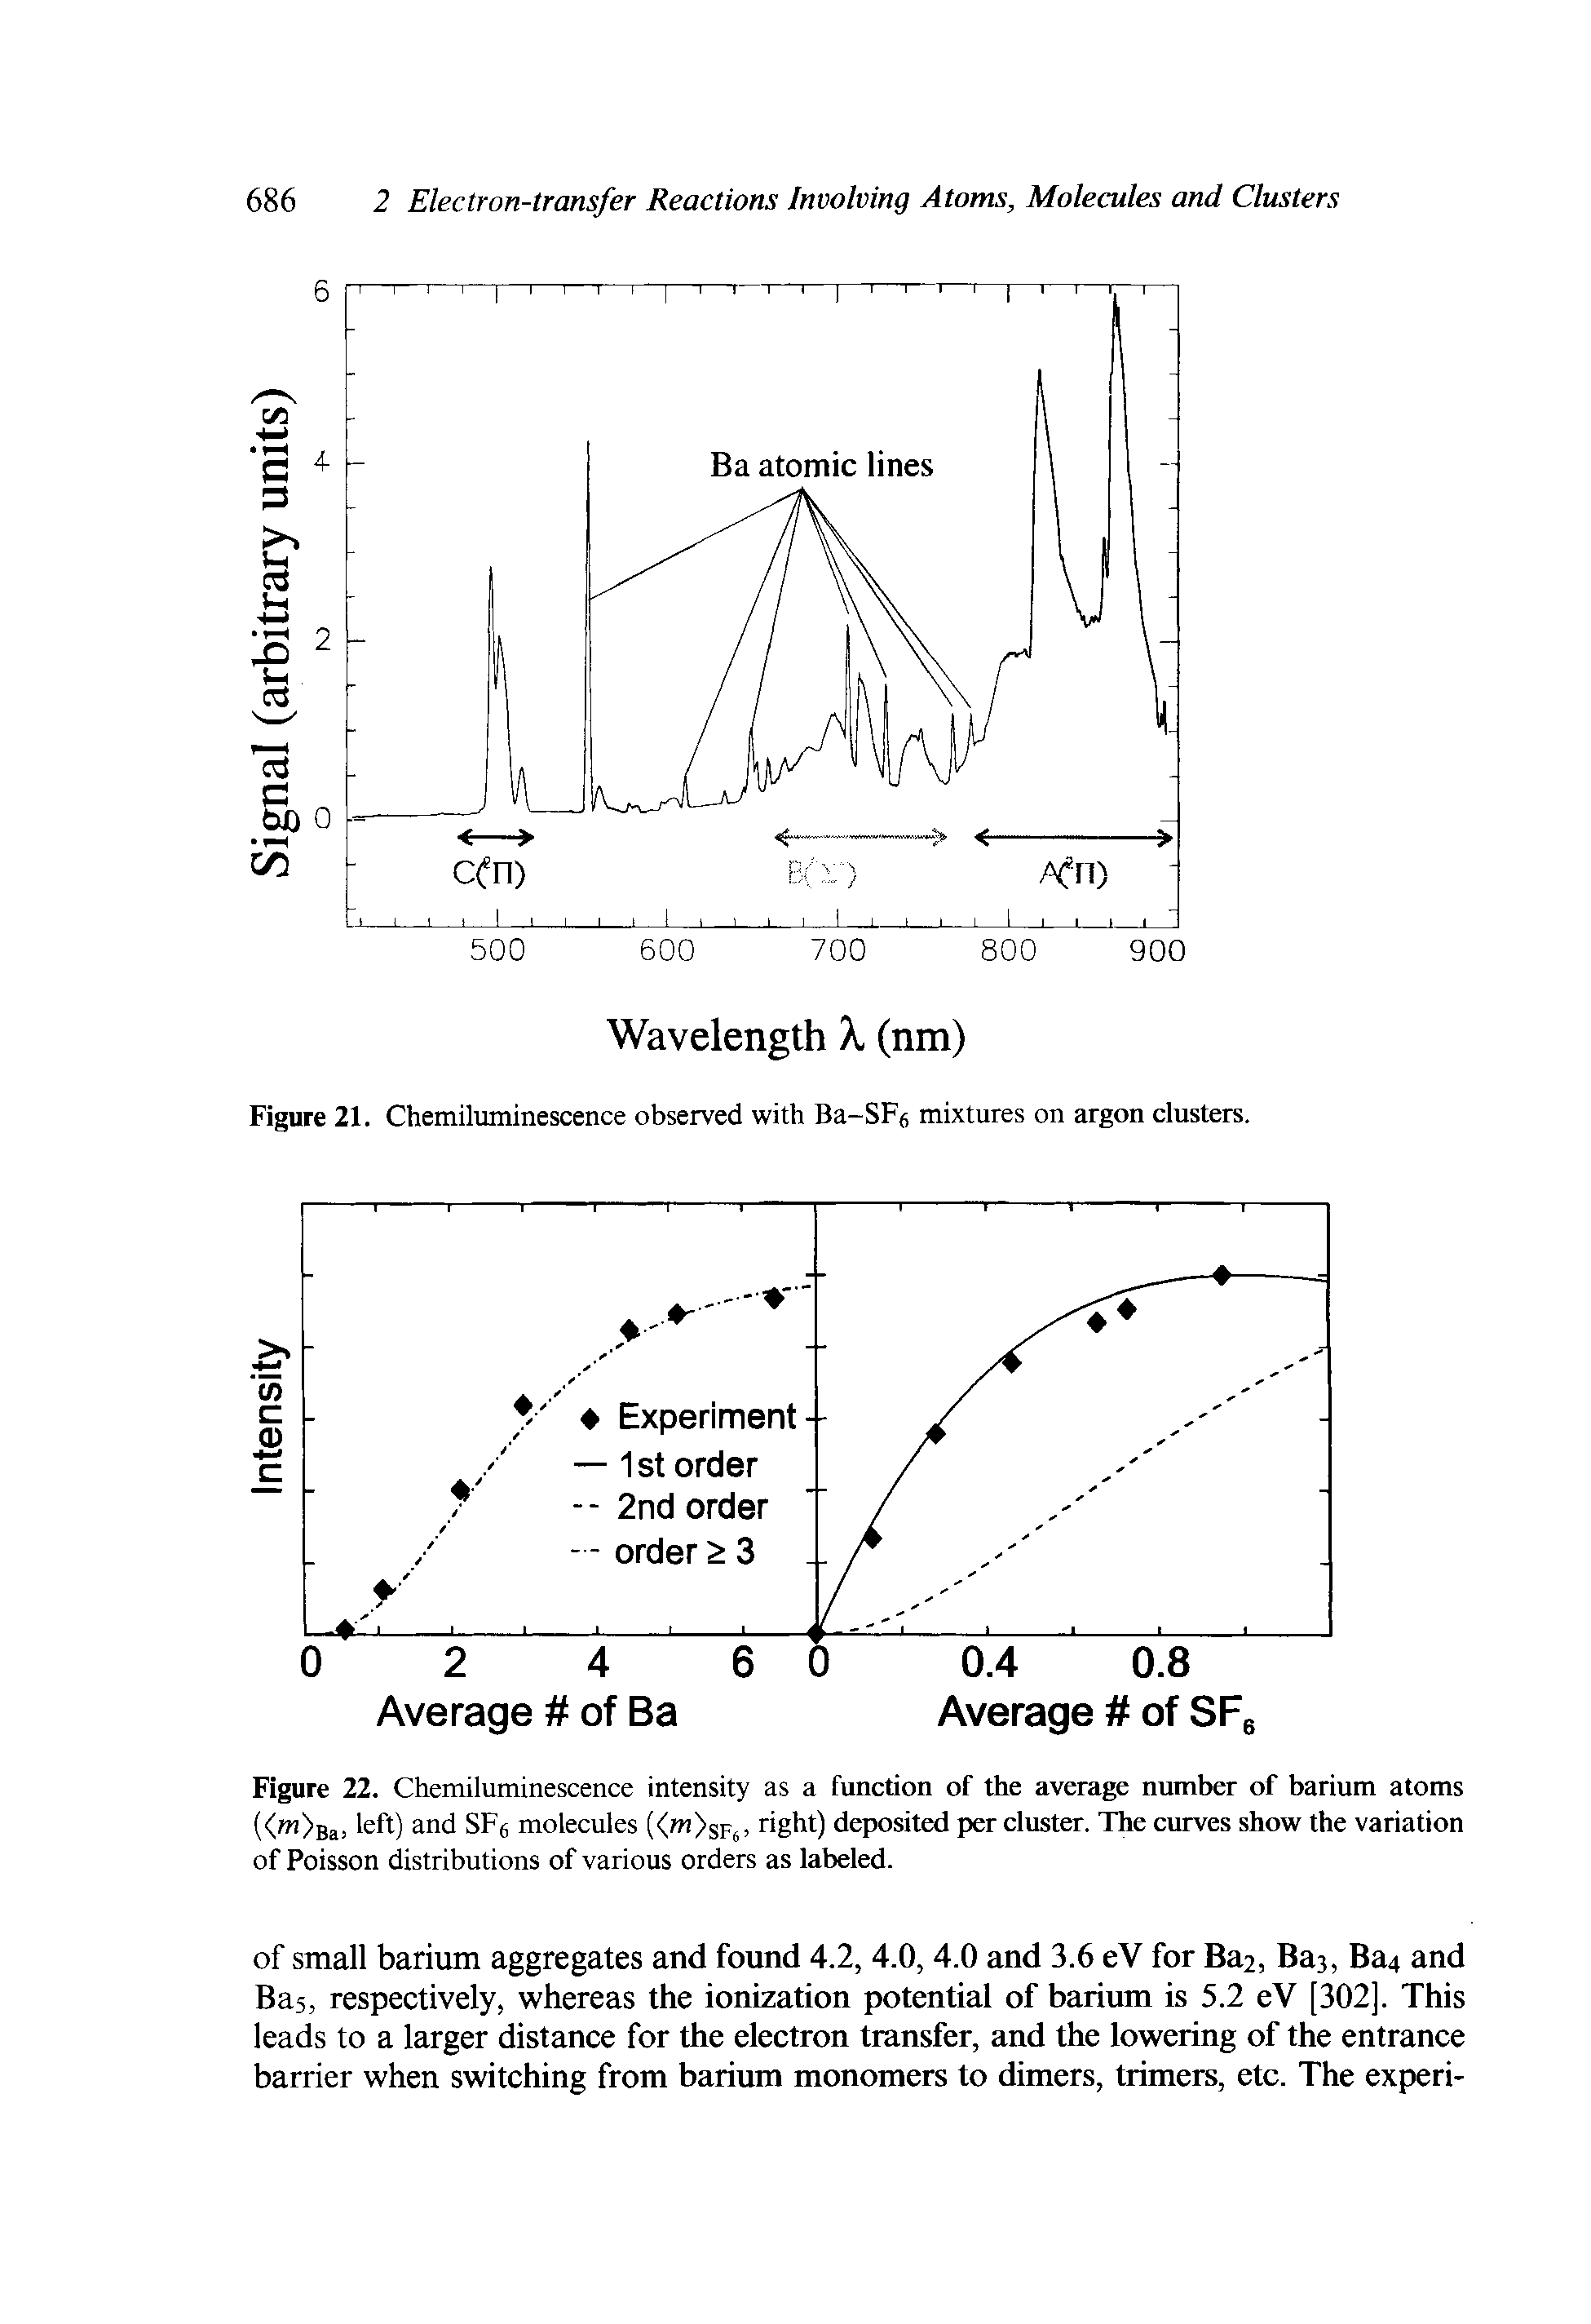 Figure 22. Chemiluminescence intensity as a function of the average number of barium atoms (<m)Ba= left) and SFg molecules (<w>sfj, right) deposited per cluster. The curves show the variation of Poisson distributions of various orders as labeled.